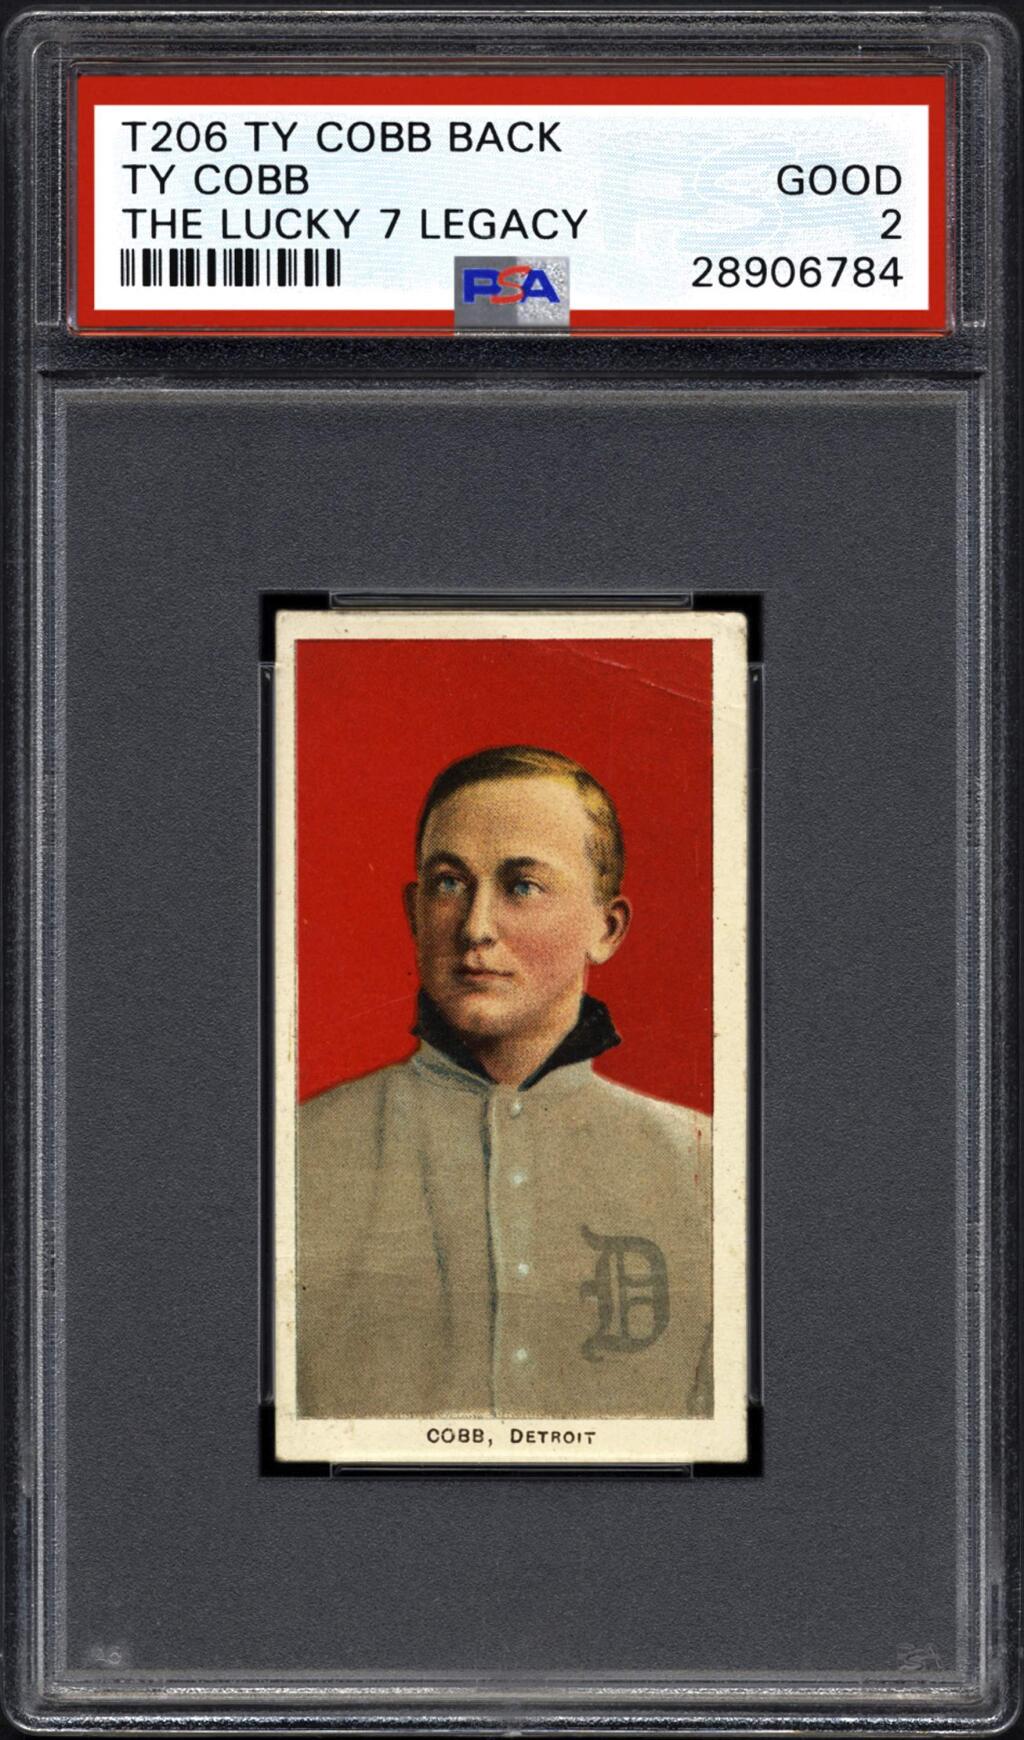 This undated photo provided by Professional Sports Authenticator shows the front of a Ty Cobb baseball card circa 1911. A family that made one of the greatest finds in the history of sports collectibles two years ago when they found seven Ty Cobb baseball cards printed between 1909 and 1911 have now found this, the eighth card in the matching set. Professional Sports Authenticator of Newport Beach, Calif., has verified the new card. (Professional Sports Authenticator via AP)